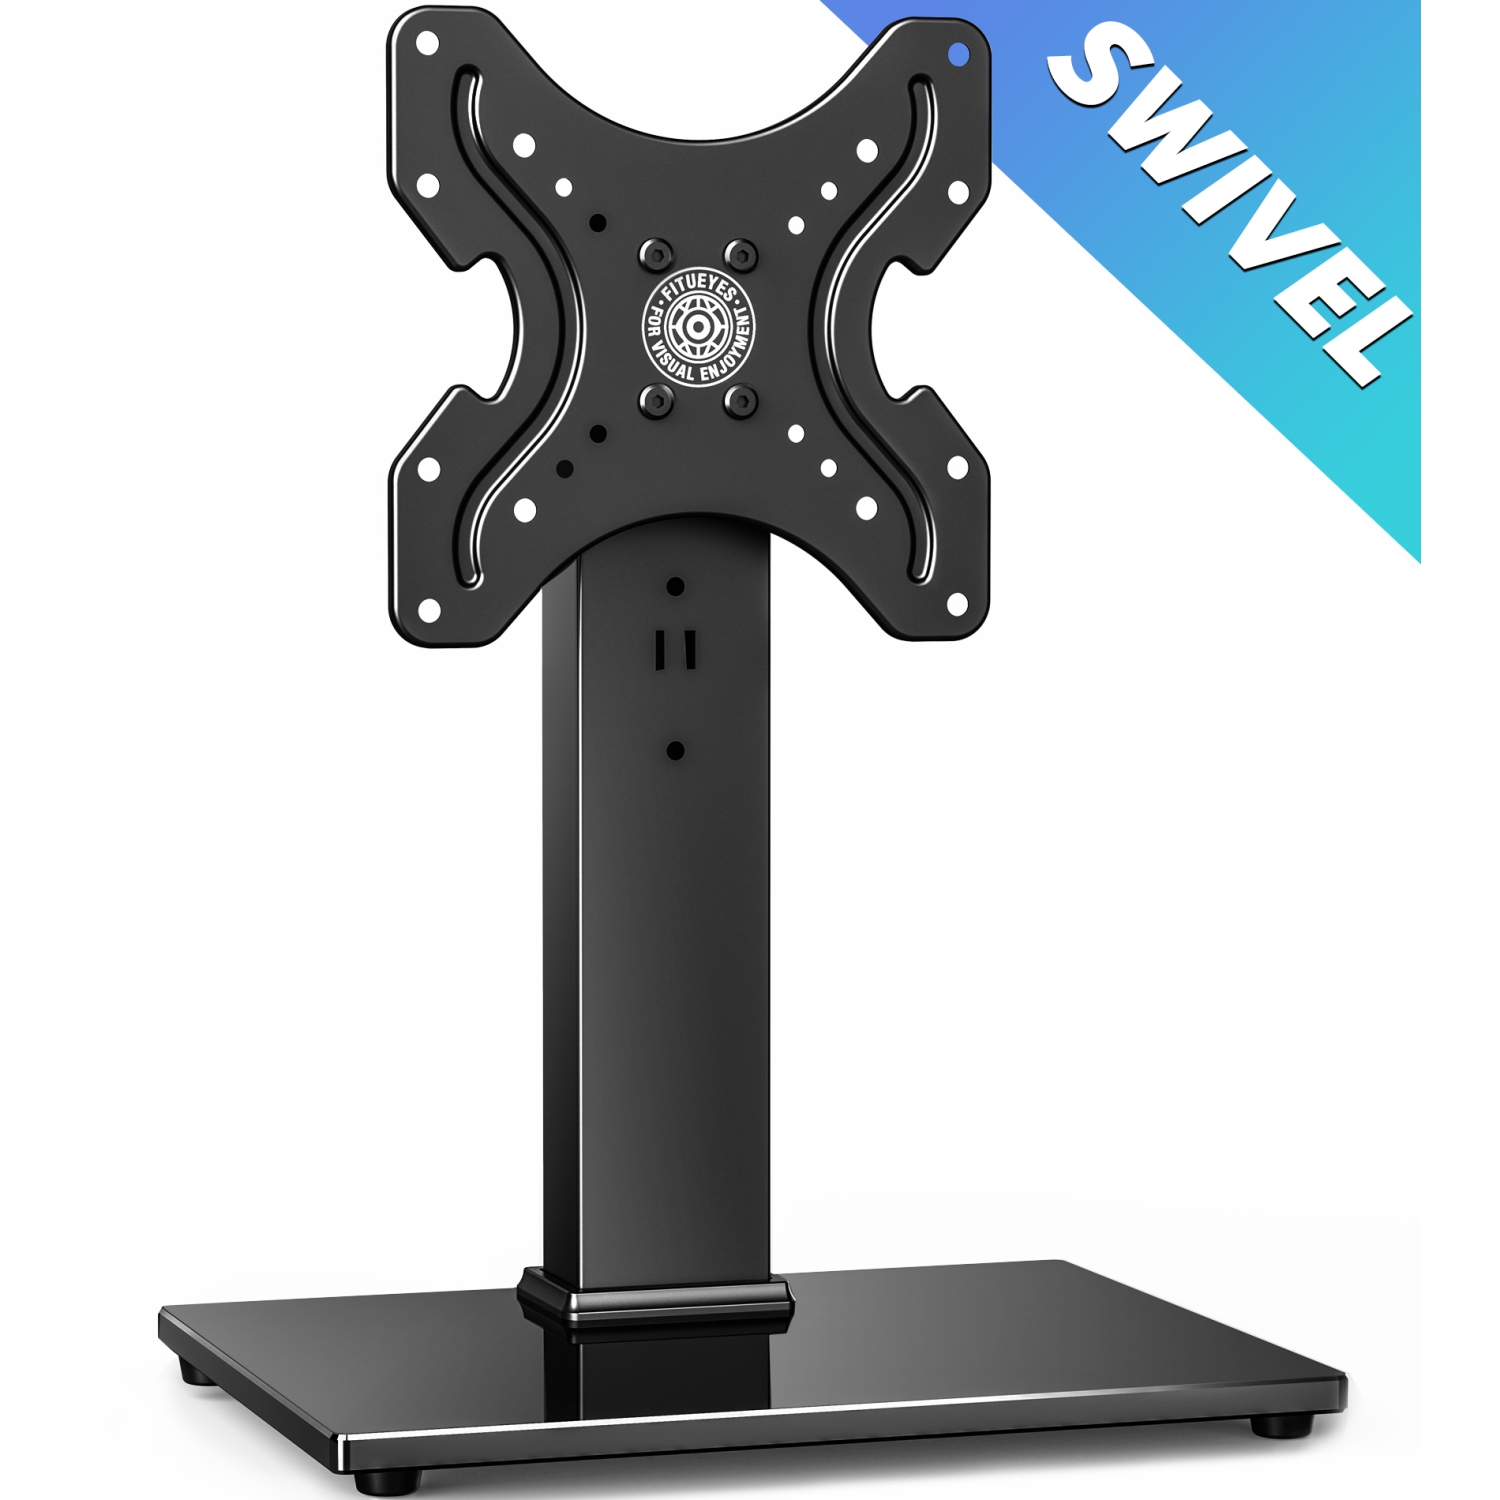 FITUEYES Swivel TV Stand on Table for 19 to 42 inch Screen, Tabletop TV Mount with 3 Level Height Adjustable, MAX VESA 200x200mm